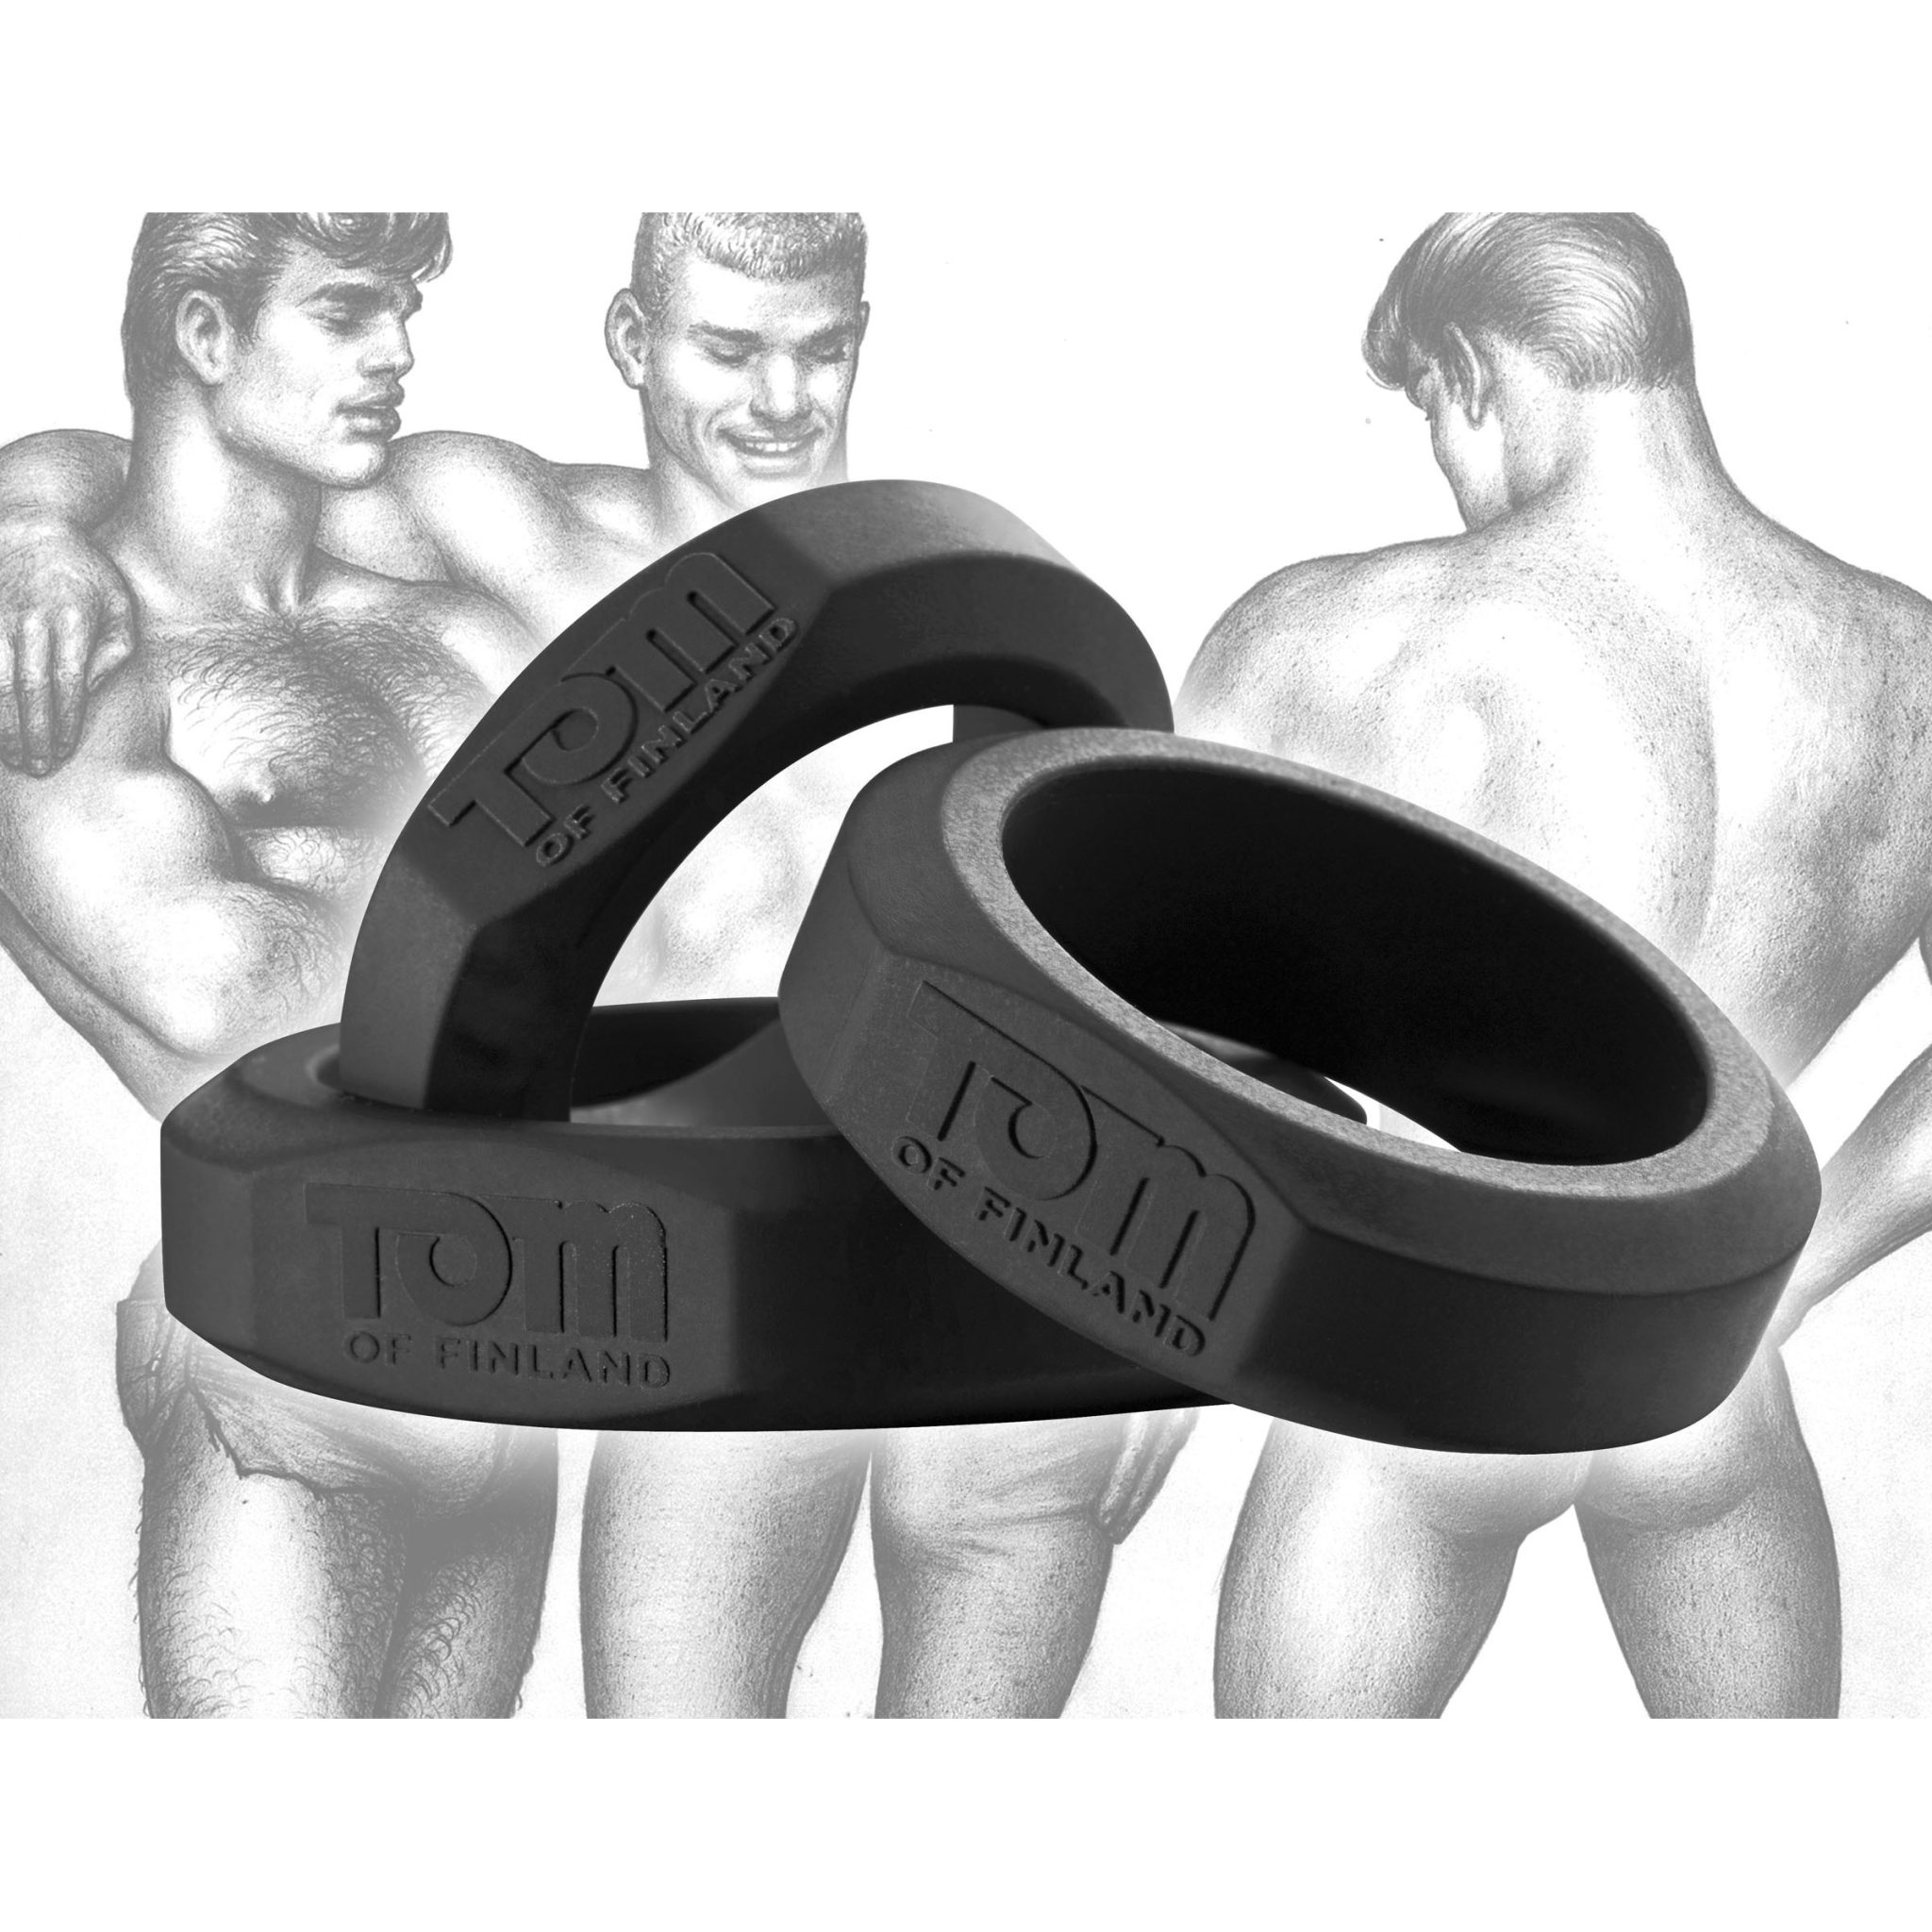 Tom of Finland 3 Piece Silicone Cock Ring Set – Black